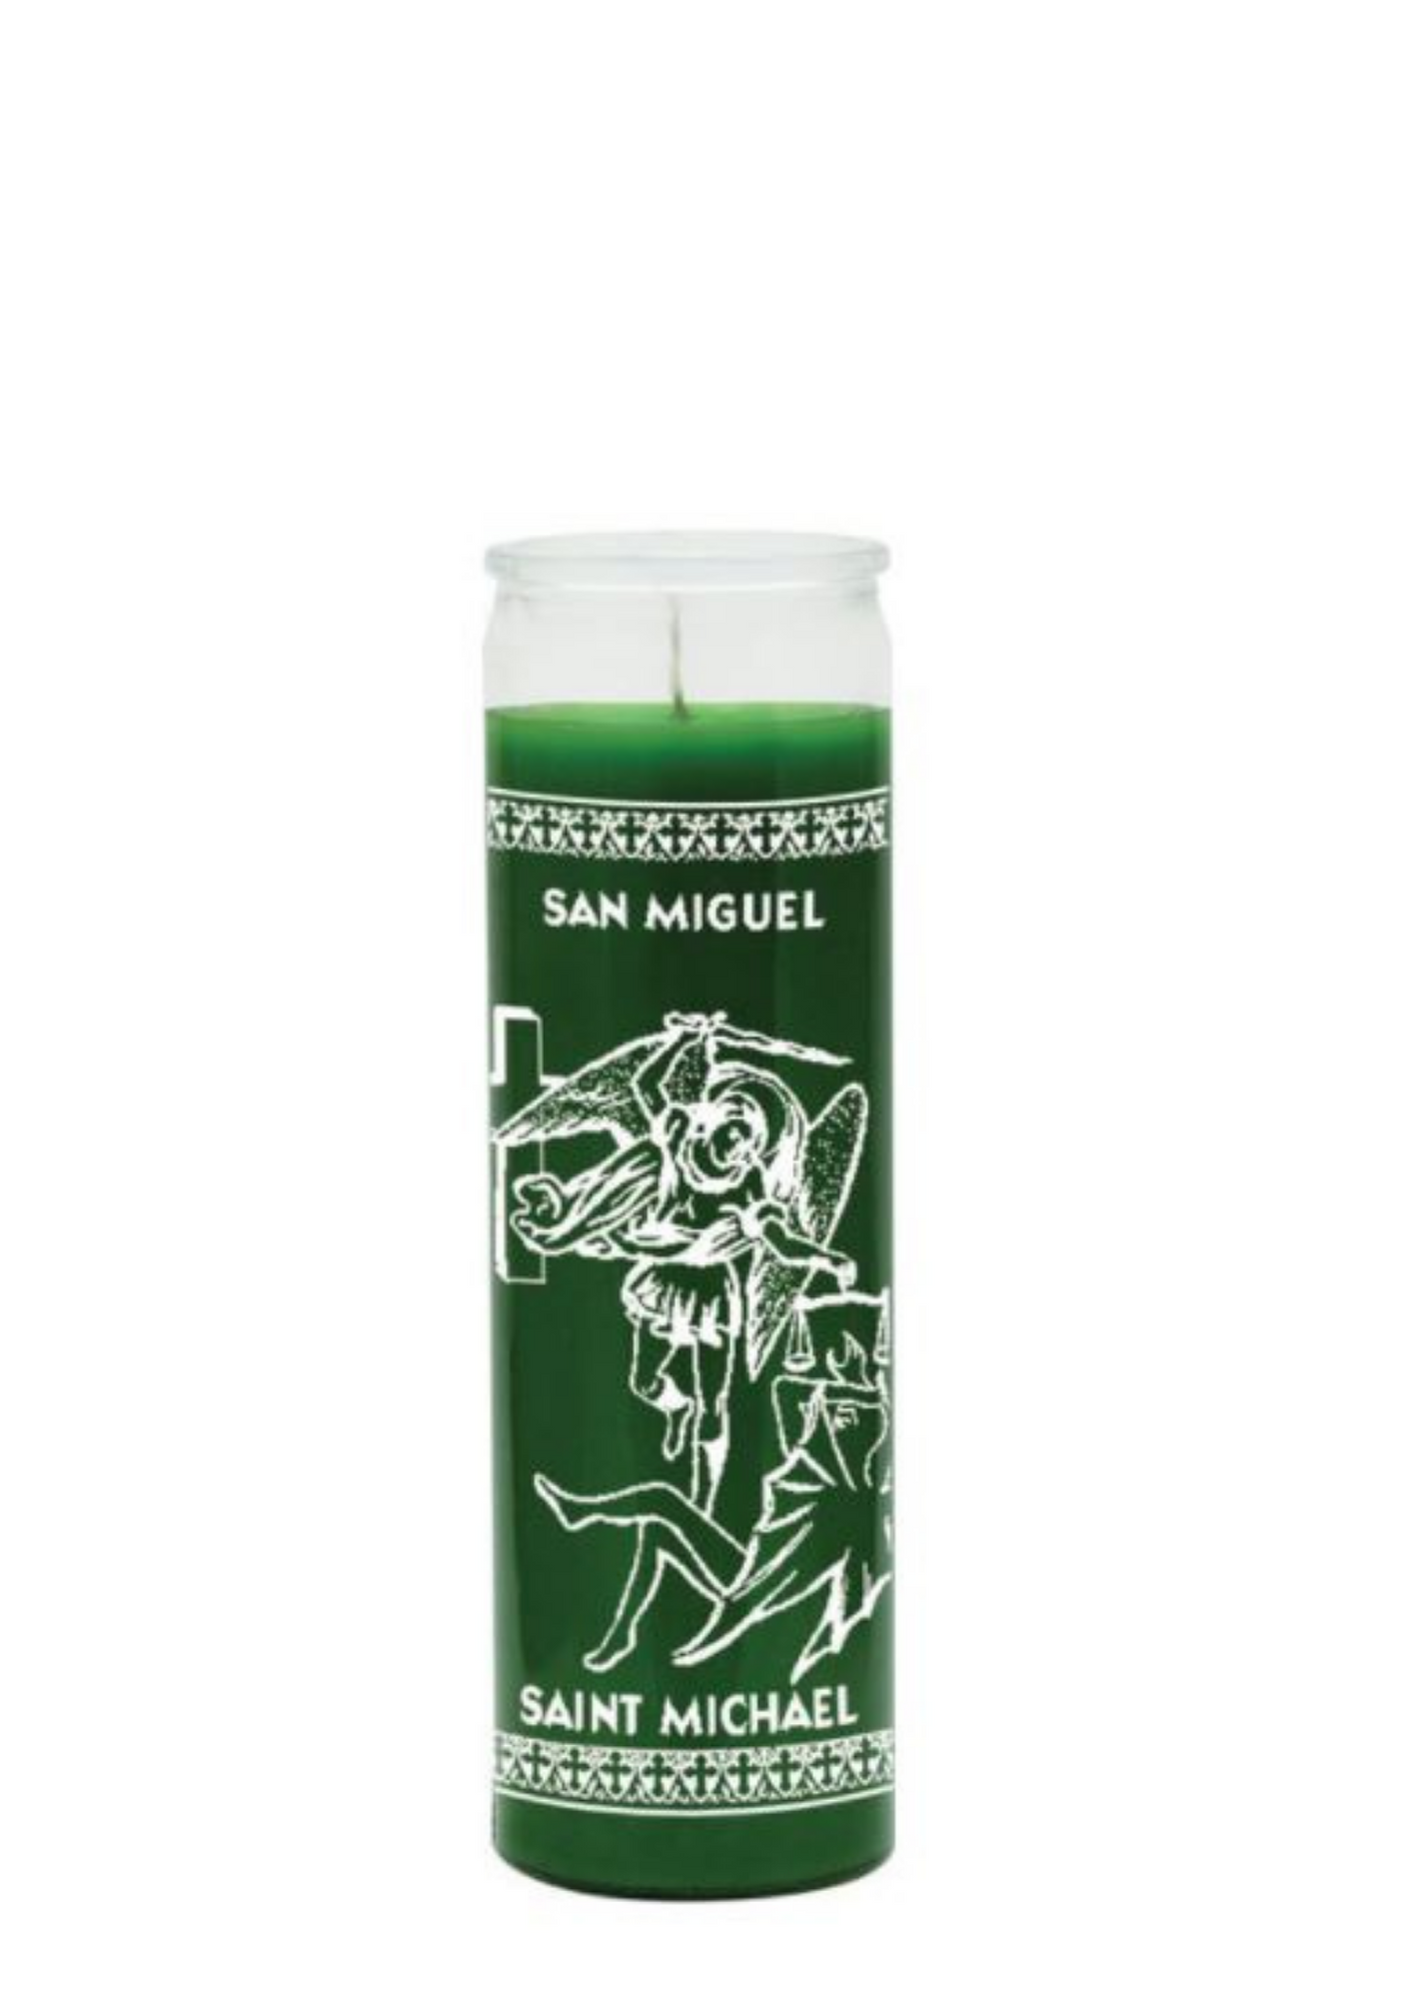 SAINT MICHAEL (Green) 1 COLOR 7 DAY CANDLE